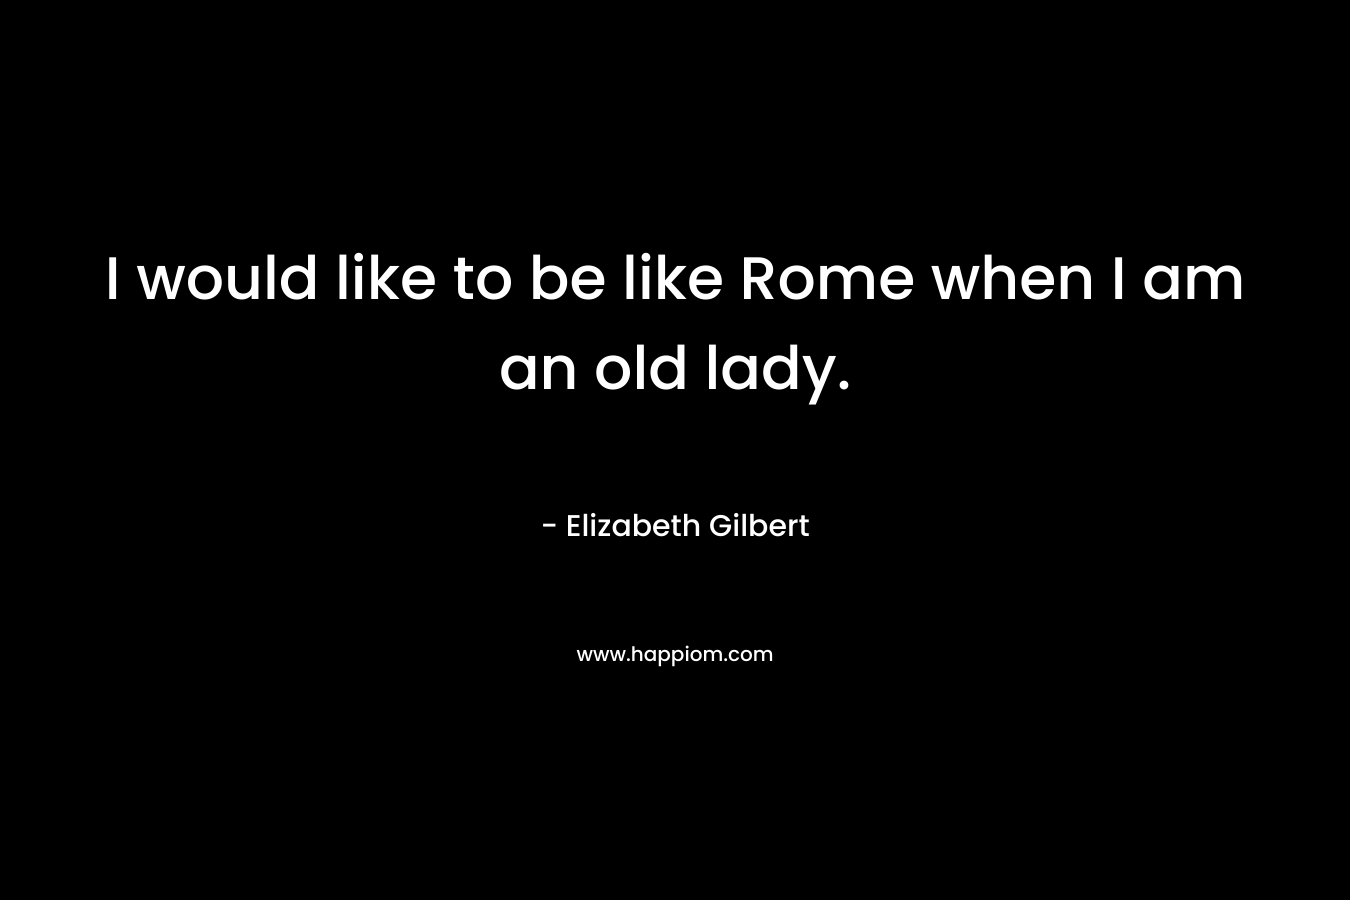 I would like to be like Rome when I am an old lady.